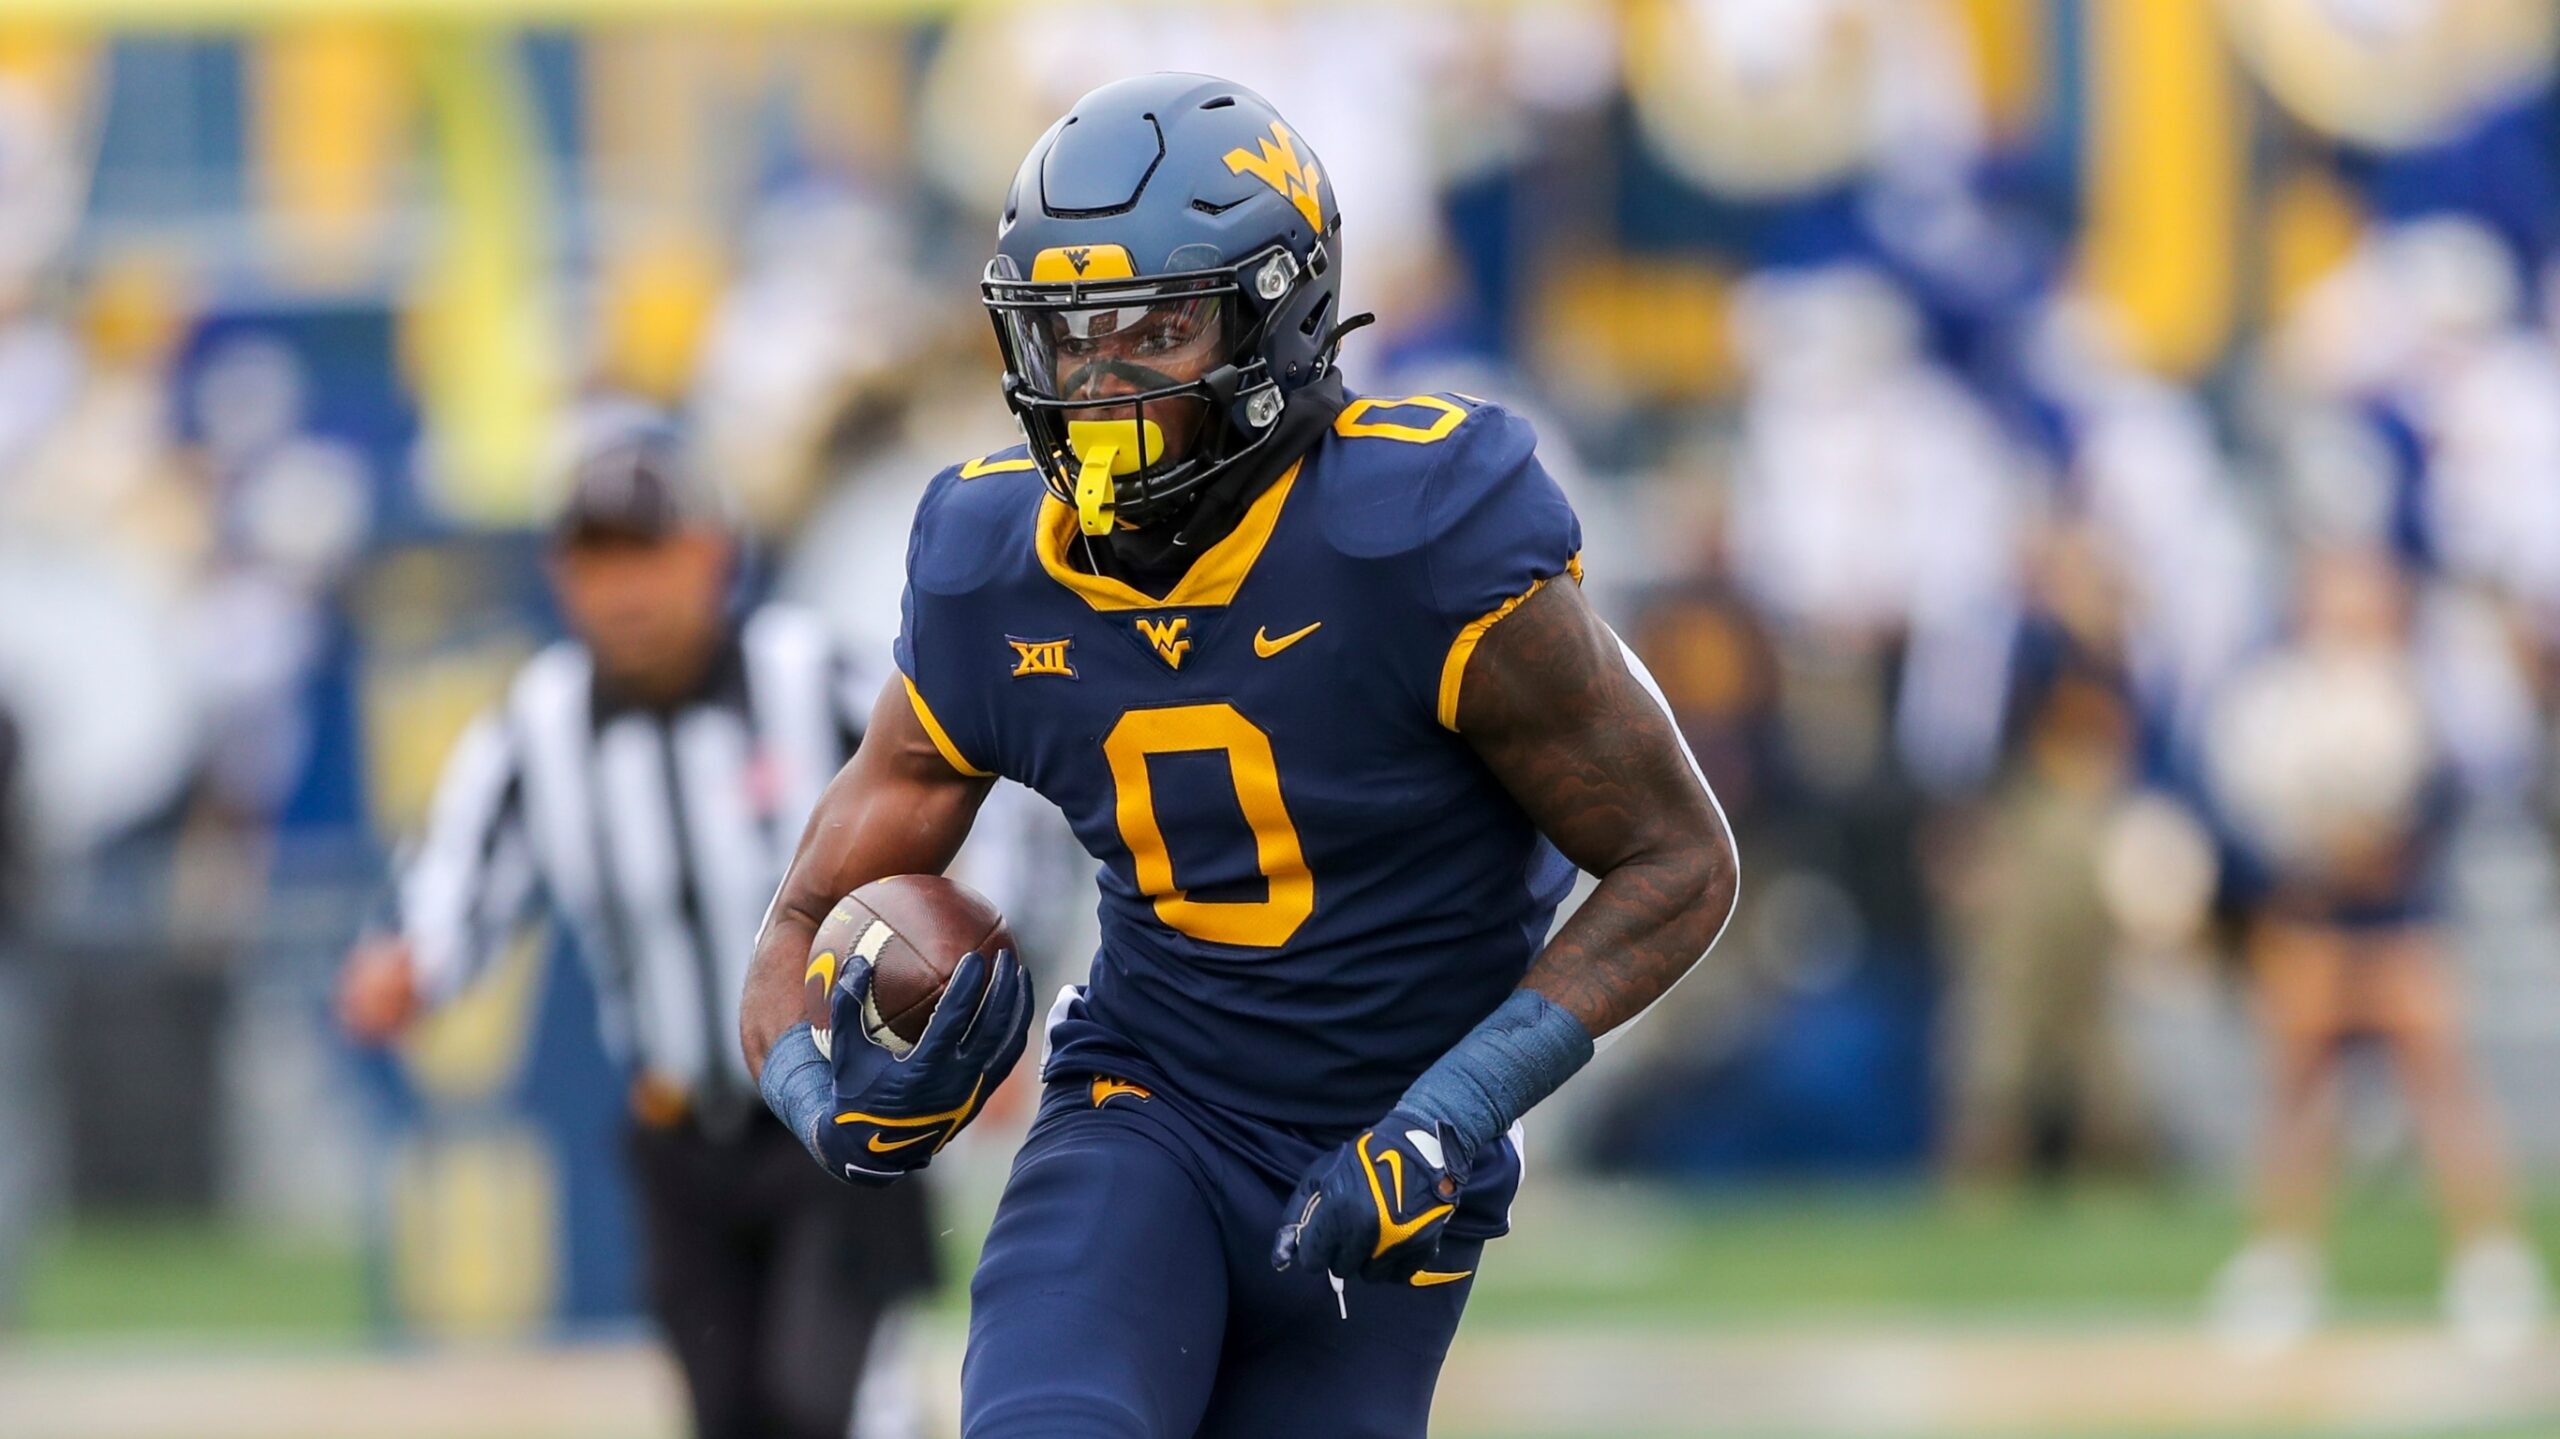 2022 West Virginia Mountaineers Football Schedule: Dates, Times, & Analysis